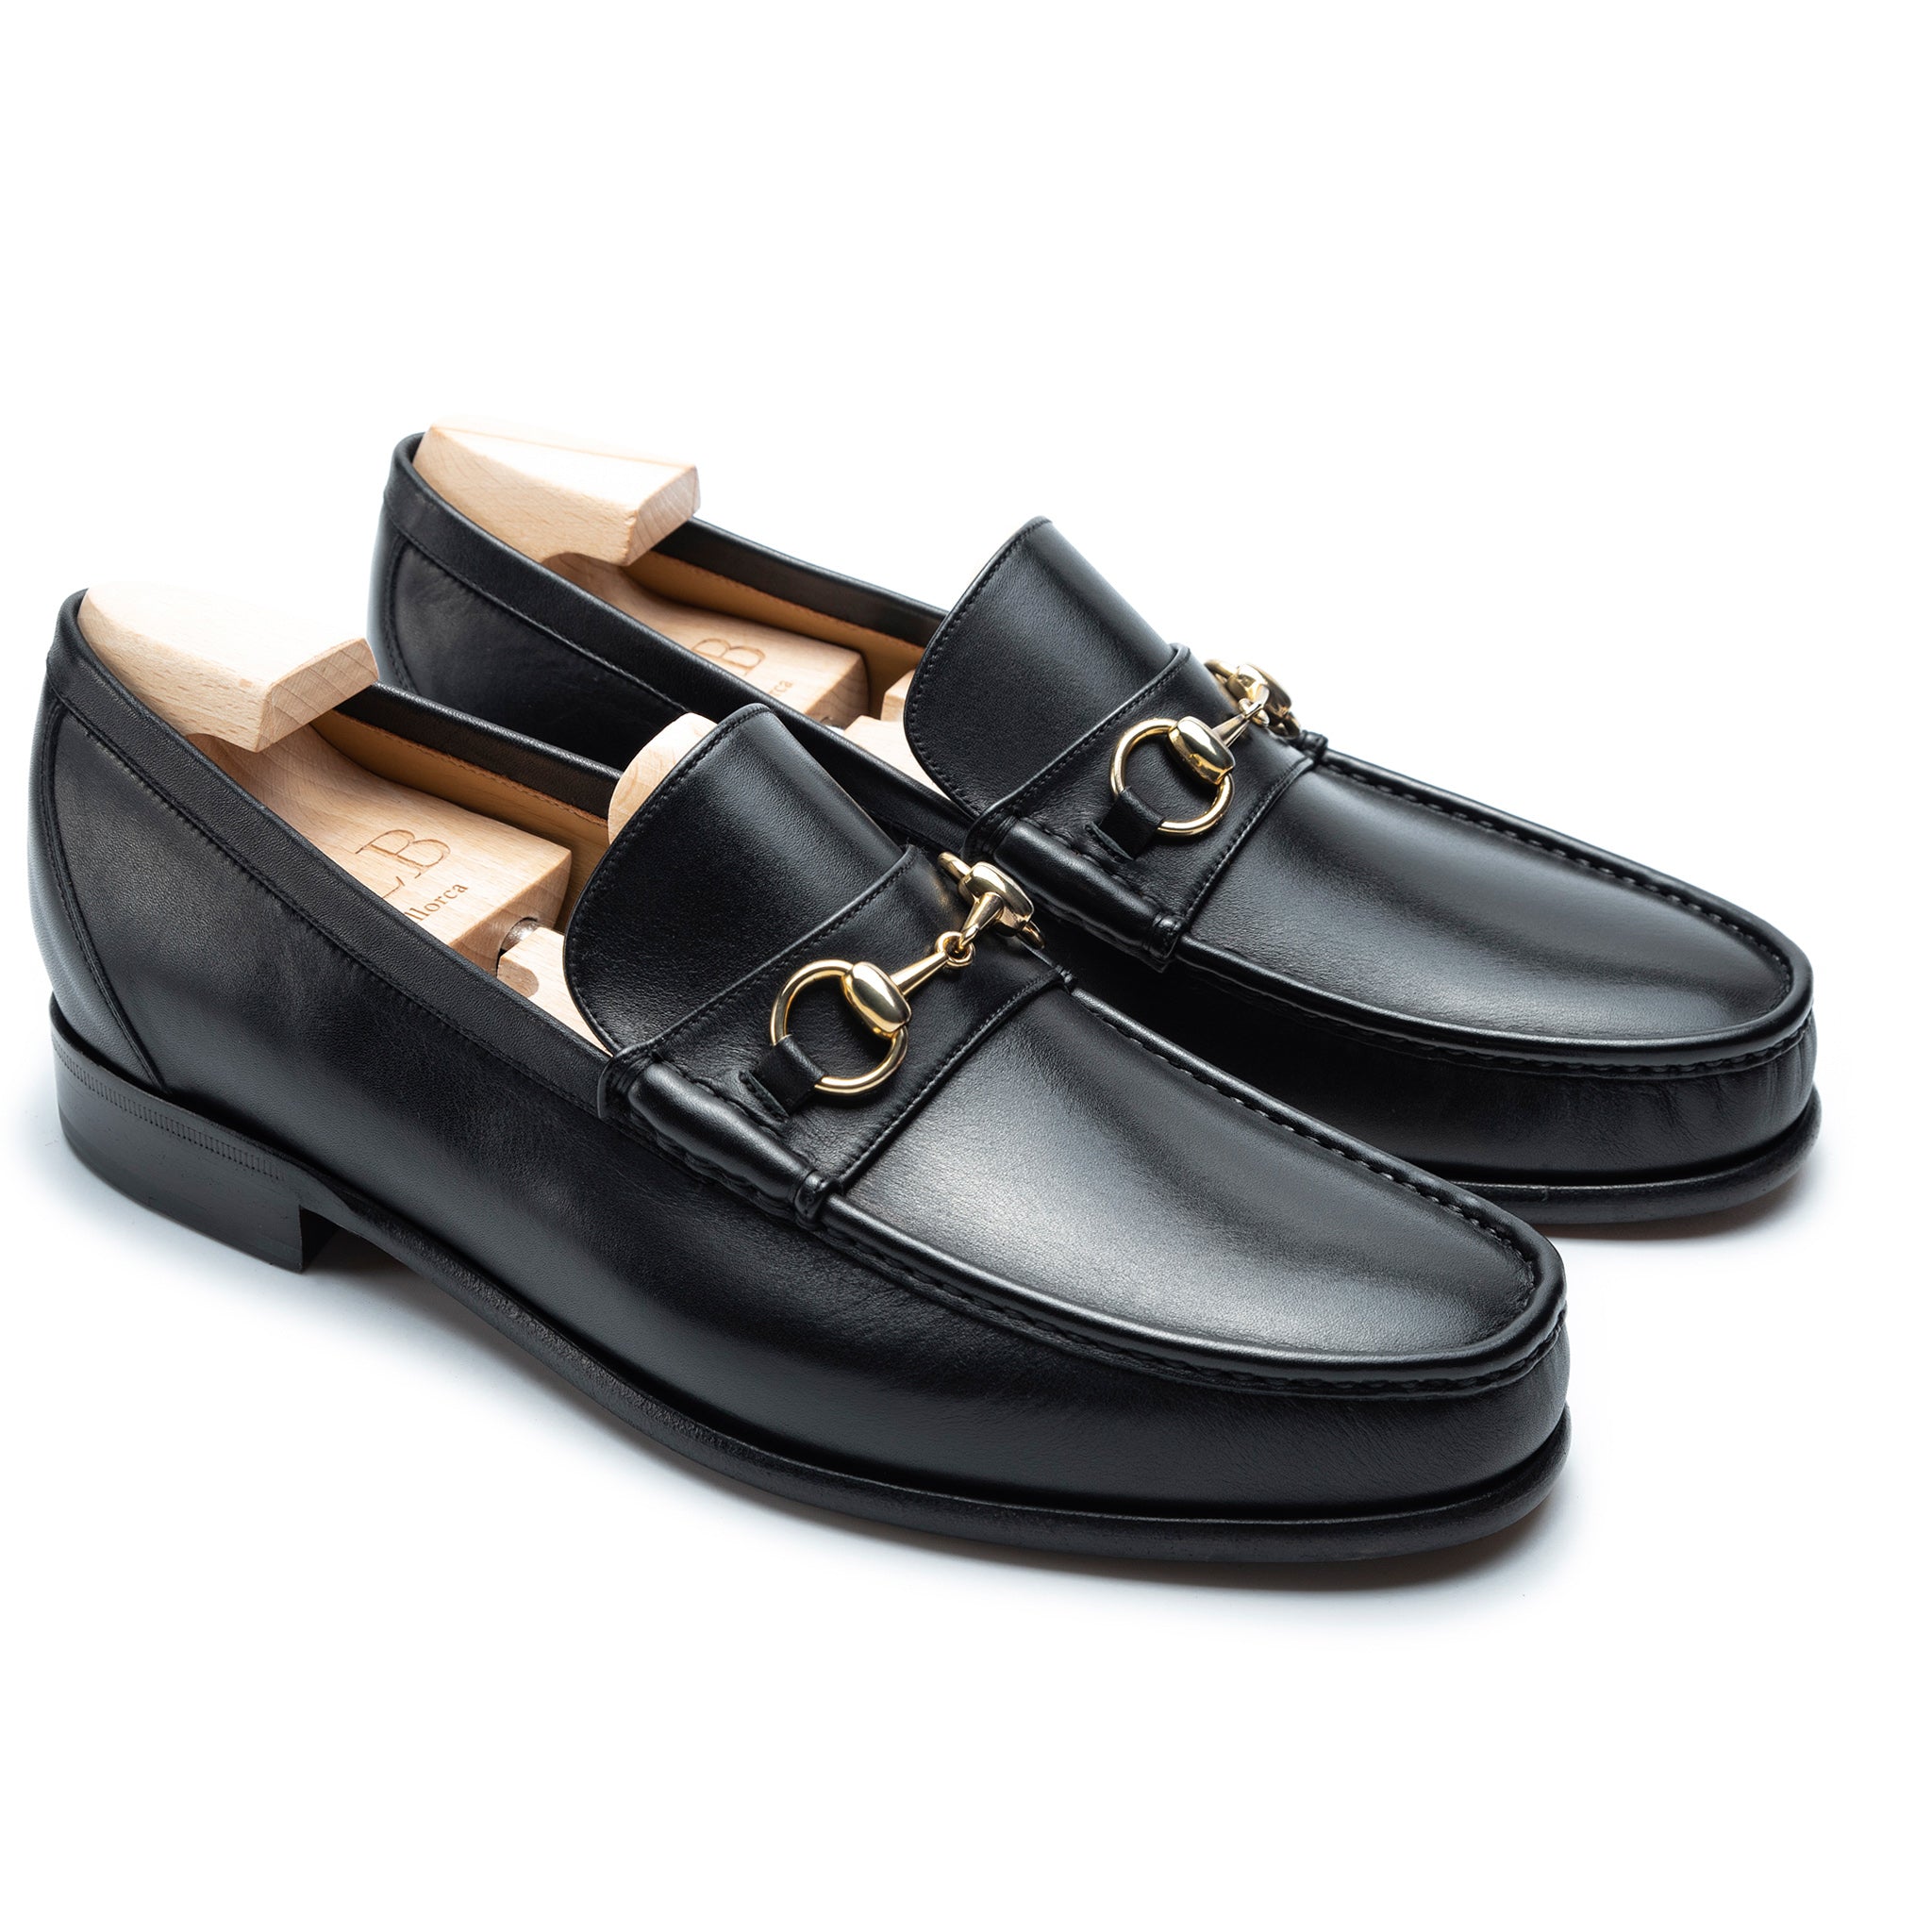 TLB Mallorca Oxford loafers | Men's Oxford shoes | Model 2508 funchal black